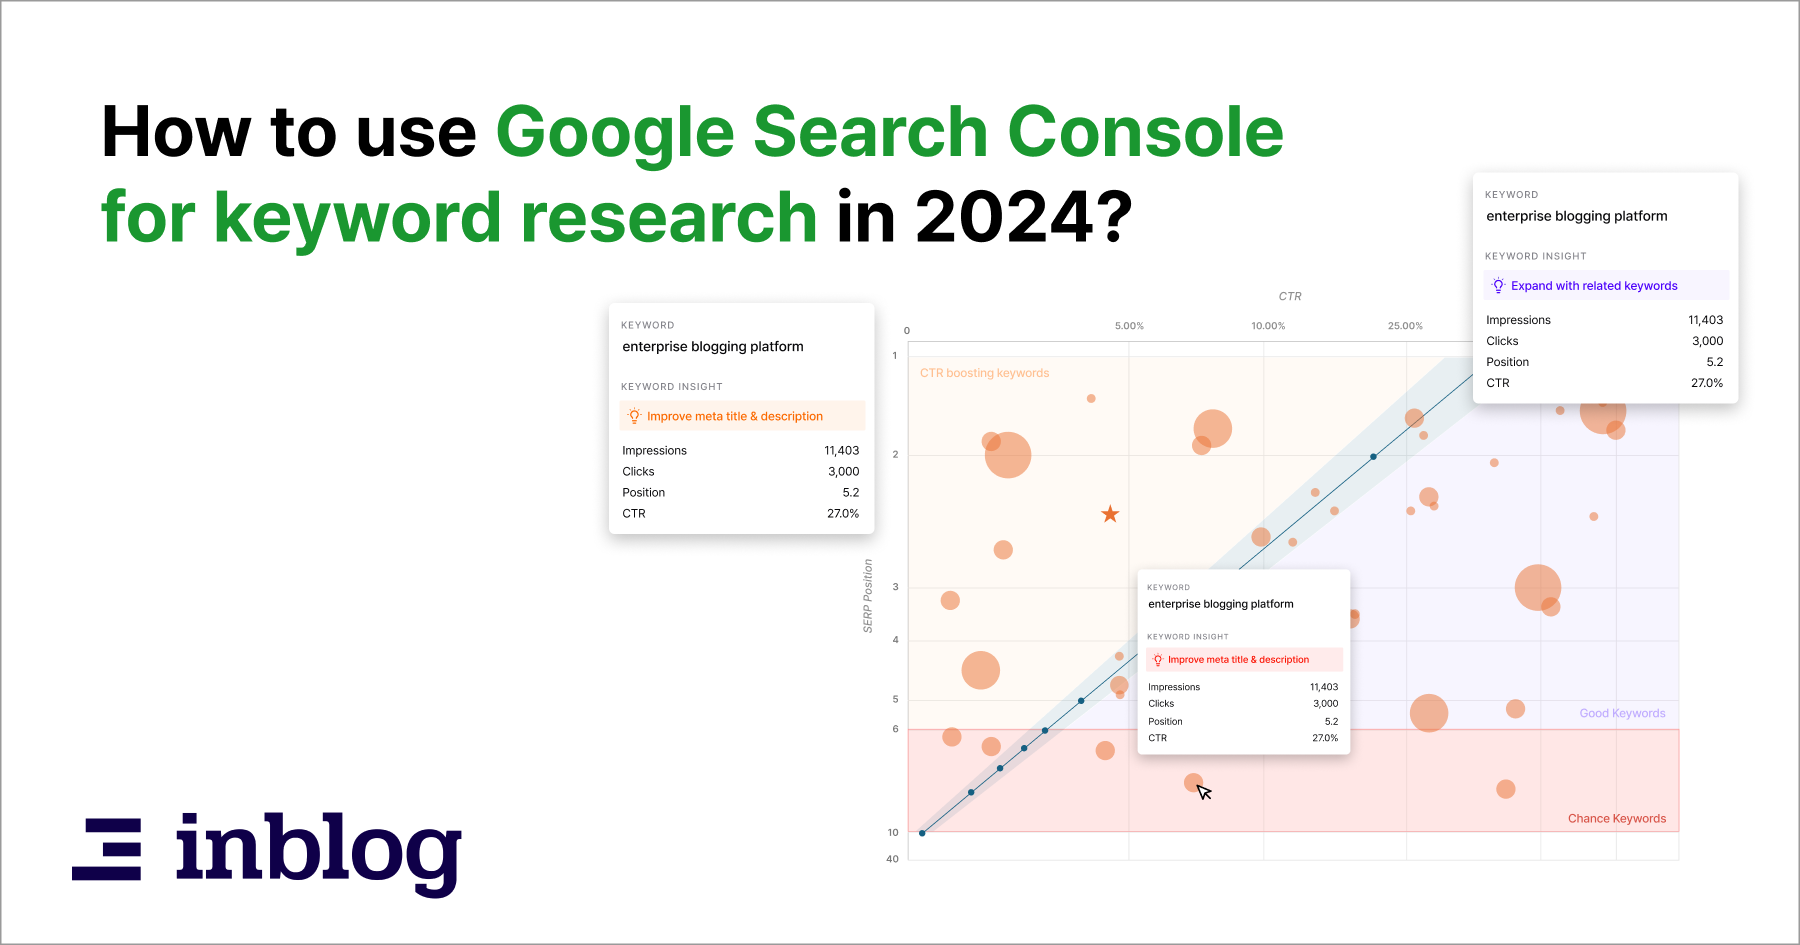 How to use Google Search Console for keyword research in 2024?